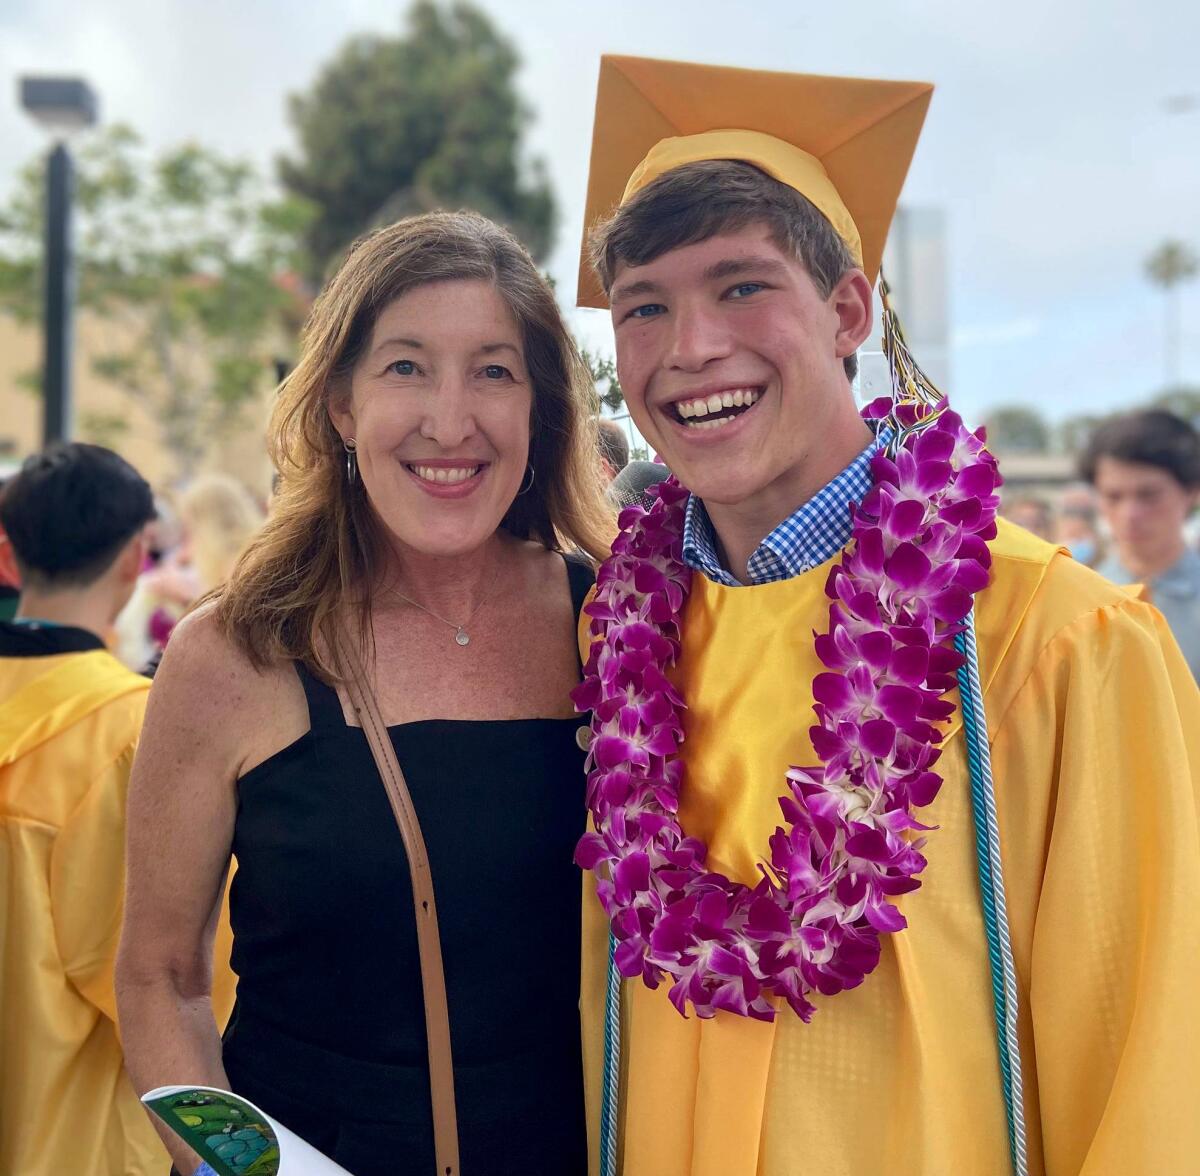 Julie Holdaway is pictured with her son Jonas at this year’s Edison High School graduation.